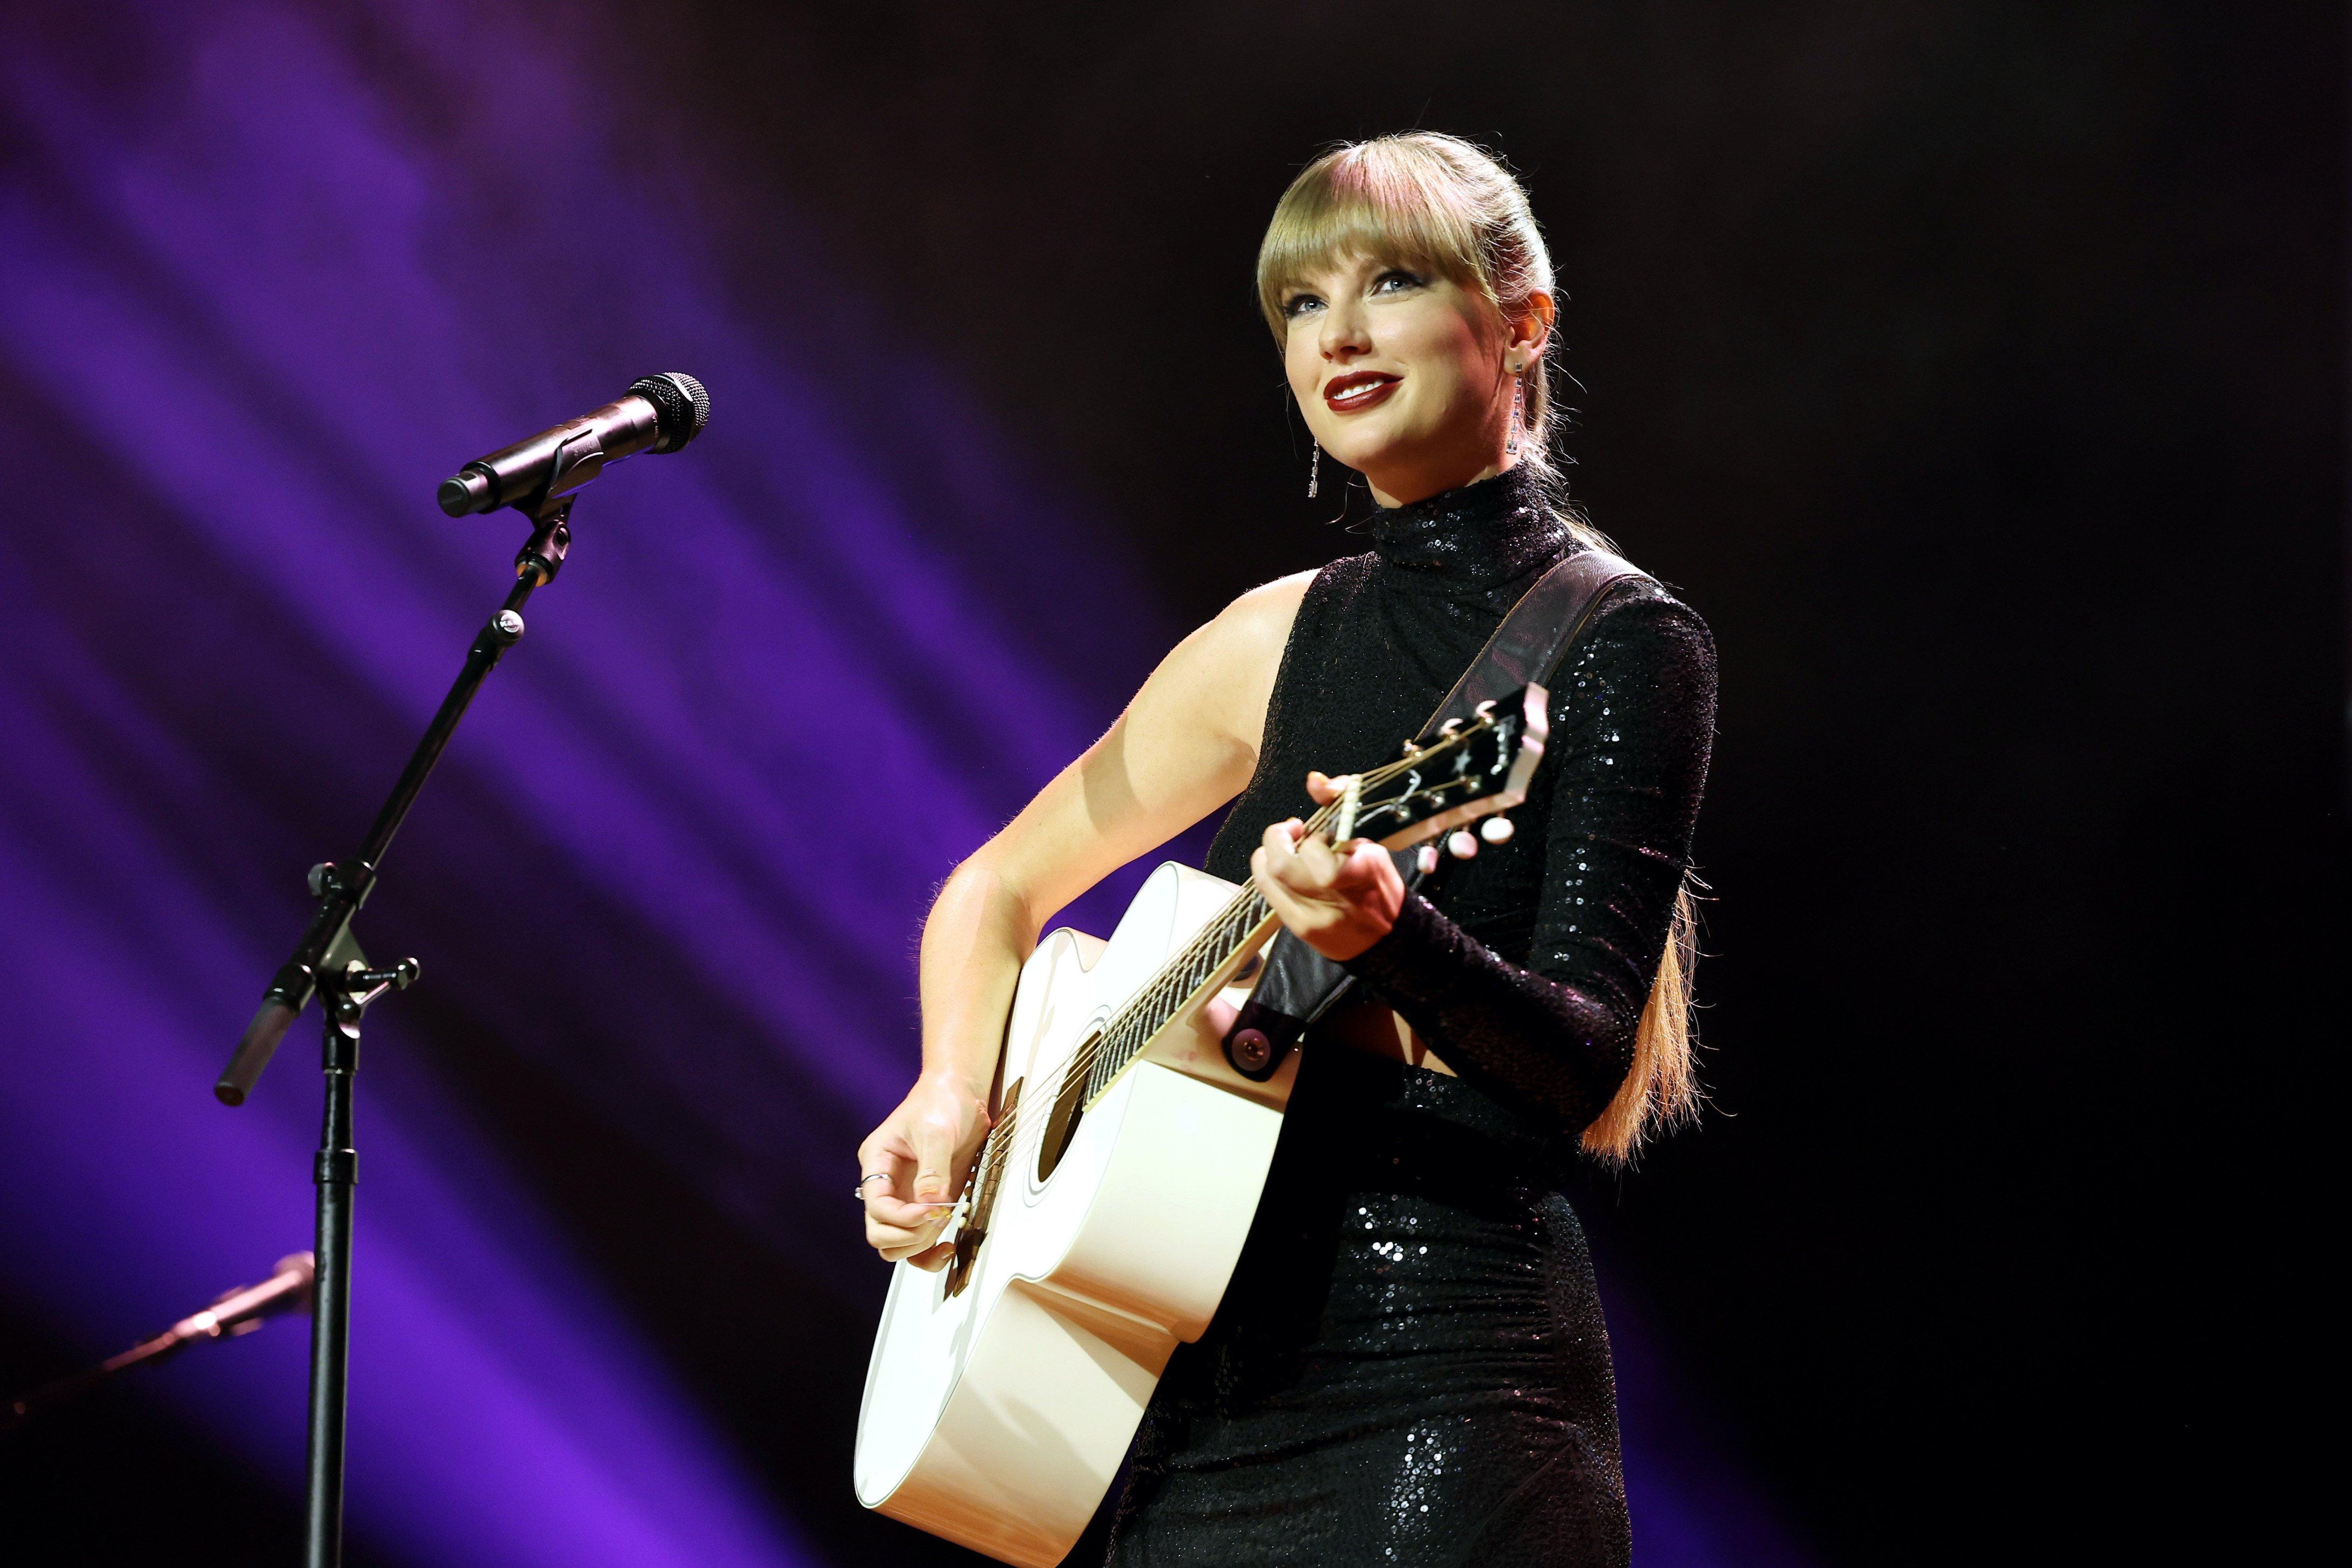 5 Takeaways From Taylor Swift's New Album 'Midnights